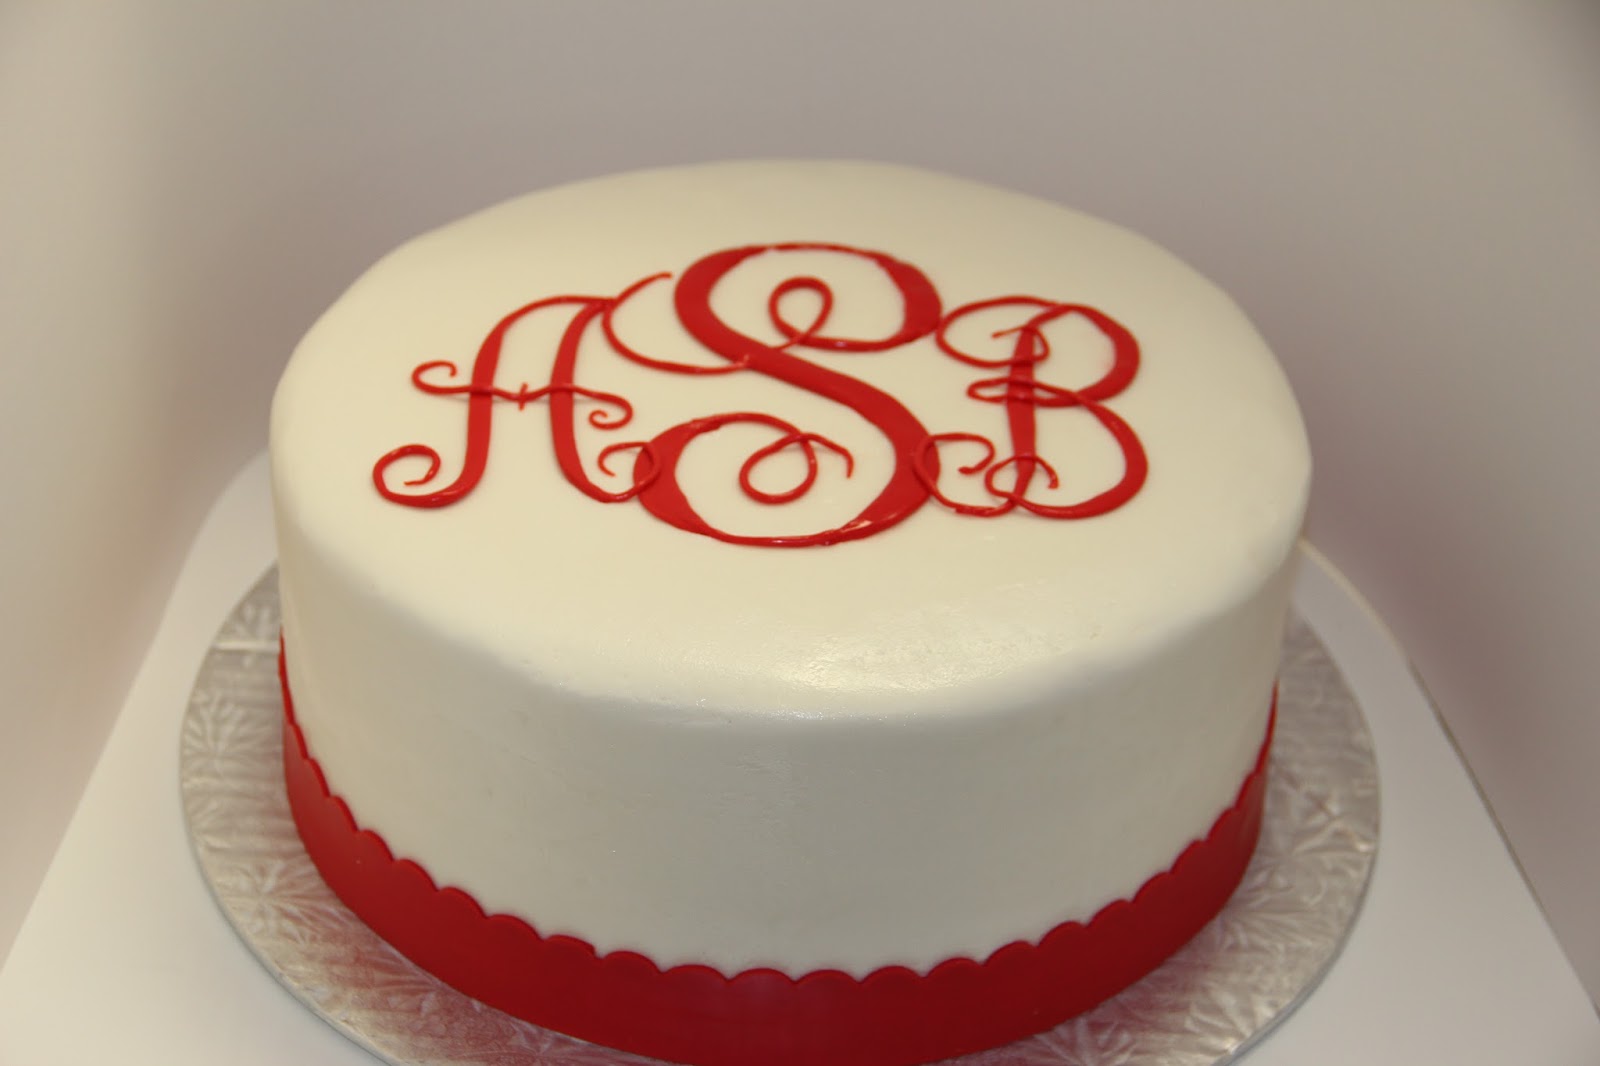 wedding cake delivery boxes This was a graduation cake for a future NC State student. The monogram 